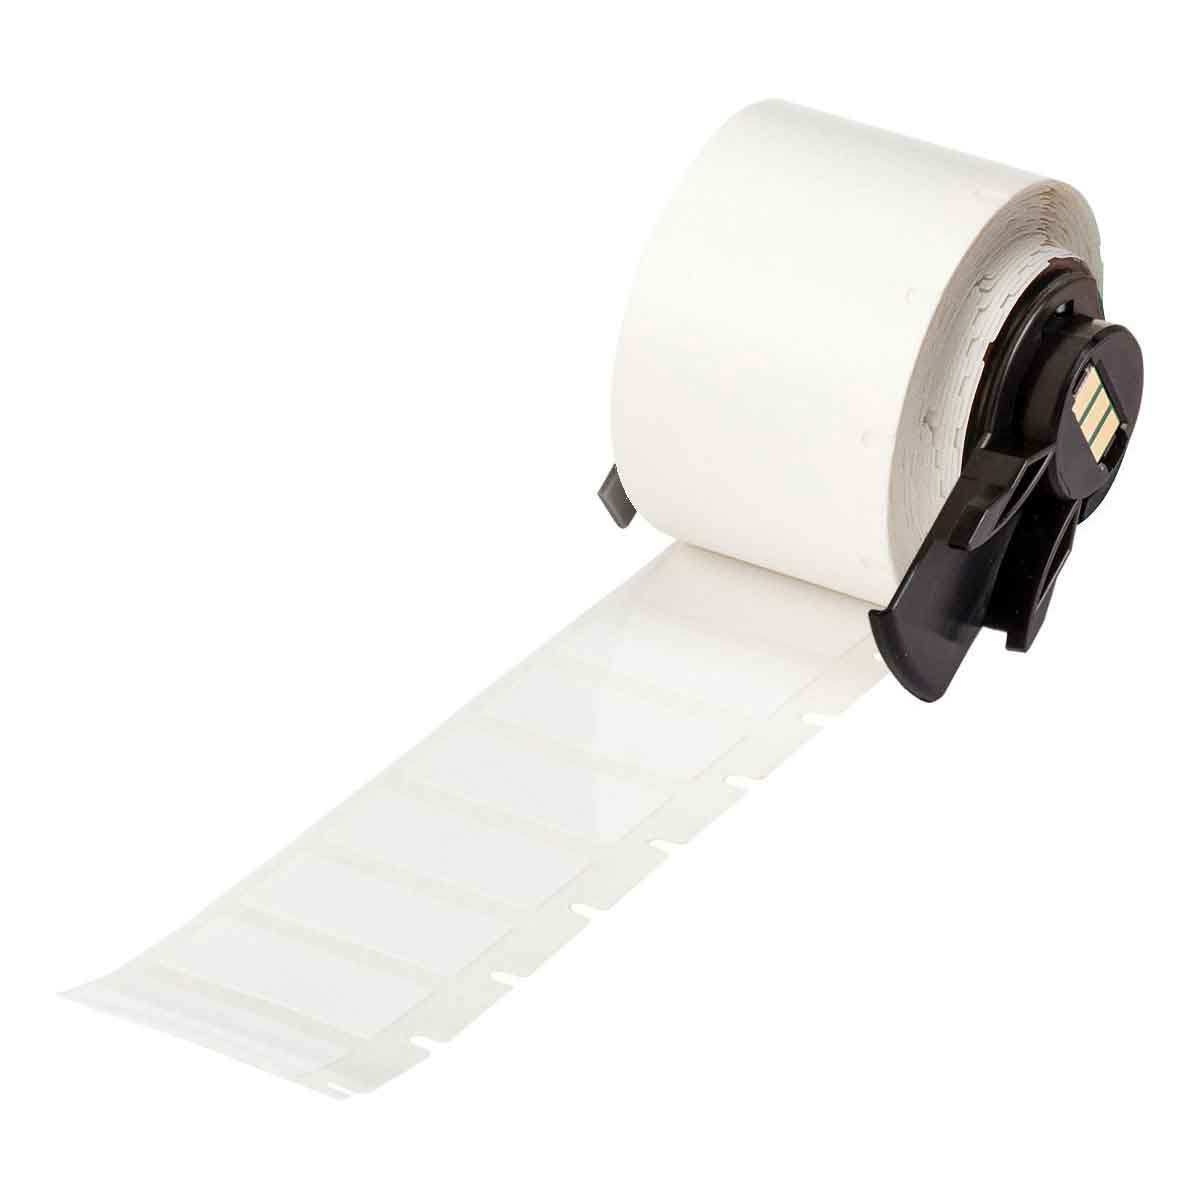 BMP61 M611 Labels Polyester 0.5 in x 1.65 in White 500/Rl